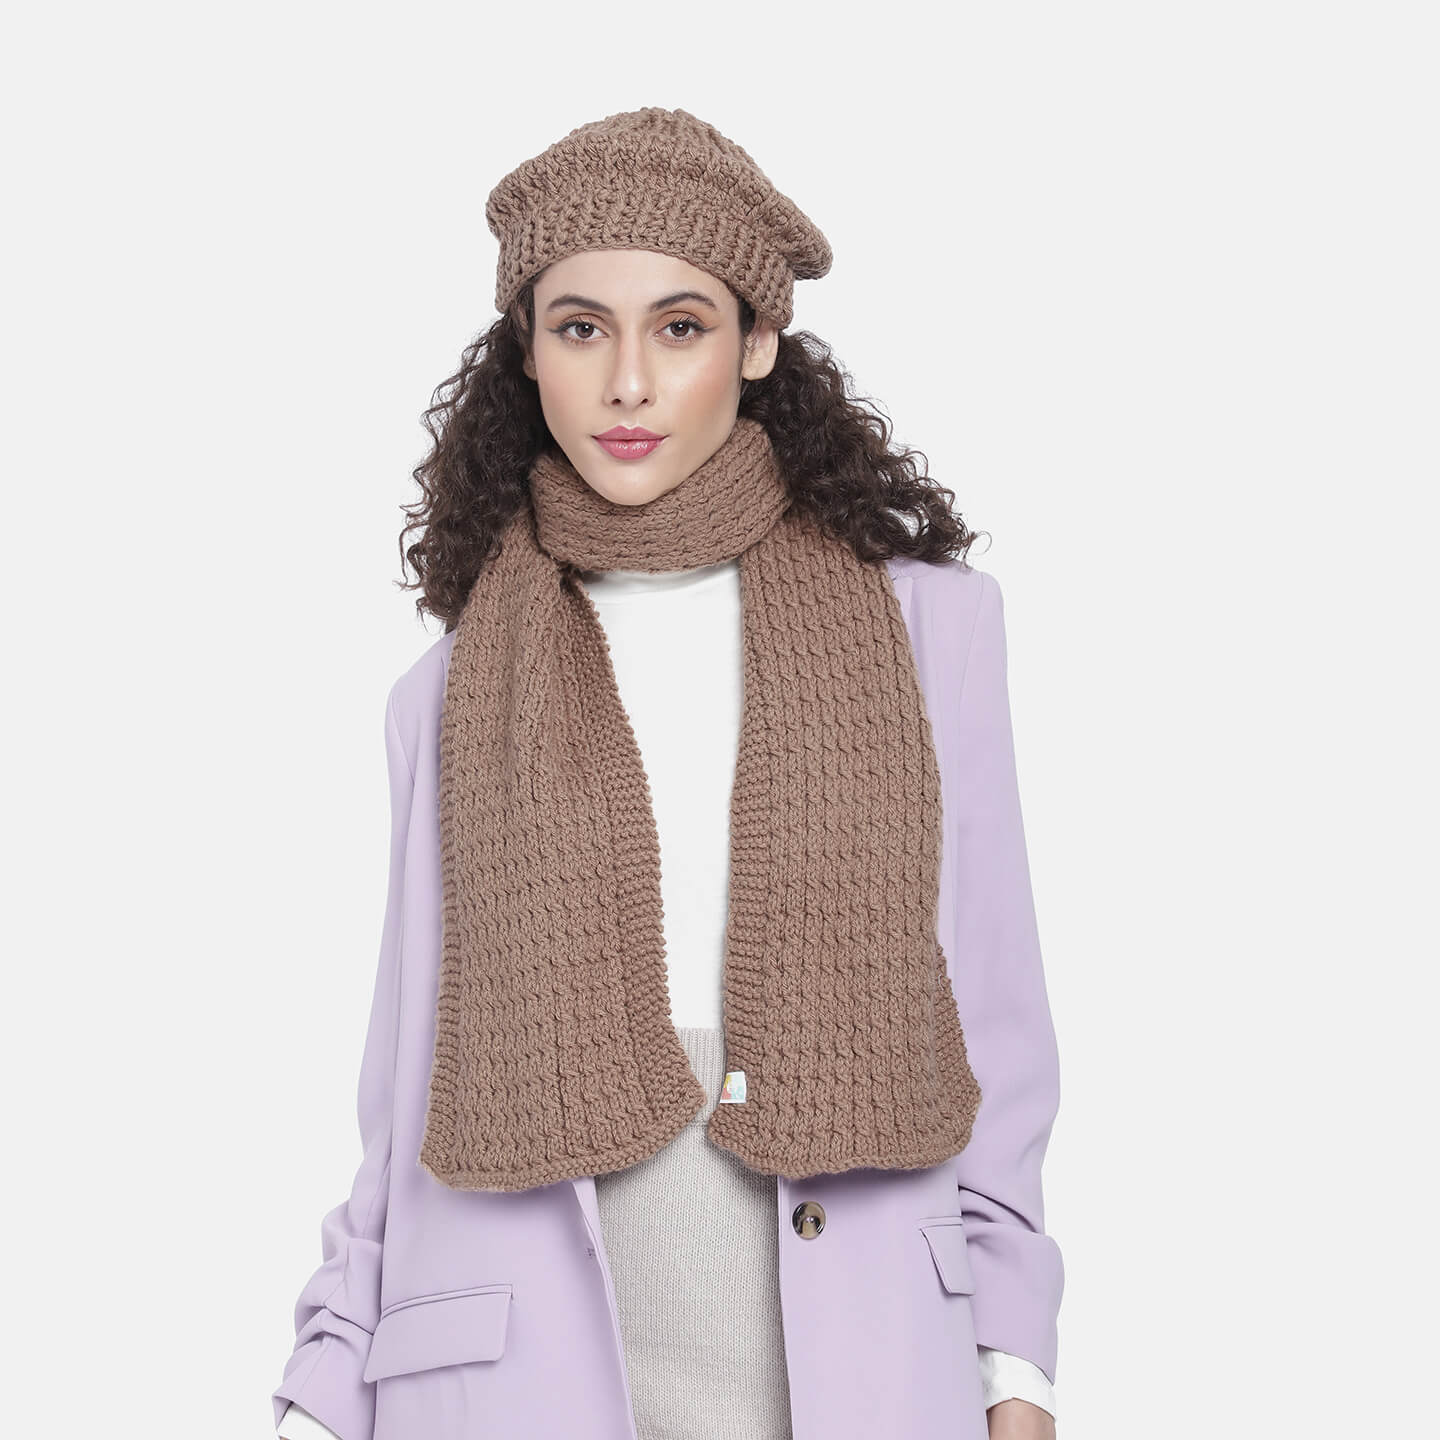 Beanie and Scarf Coordinating Set - 3181